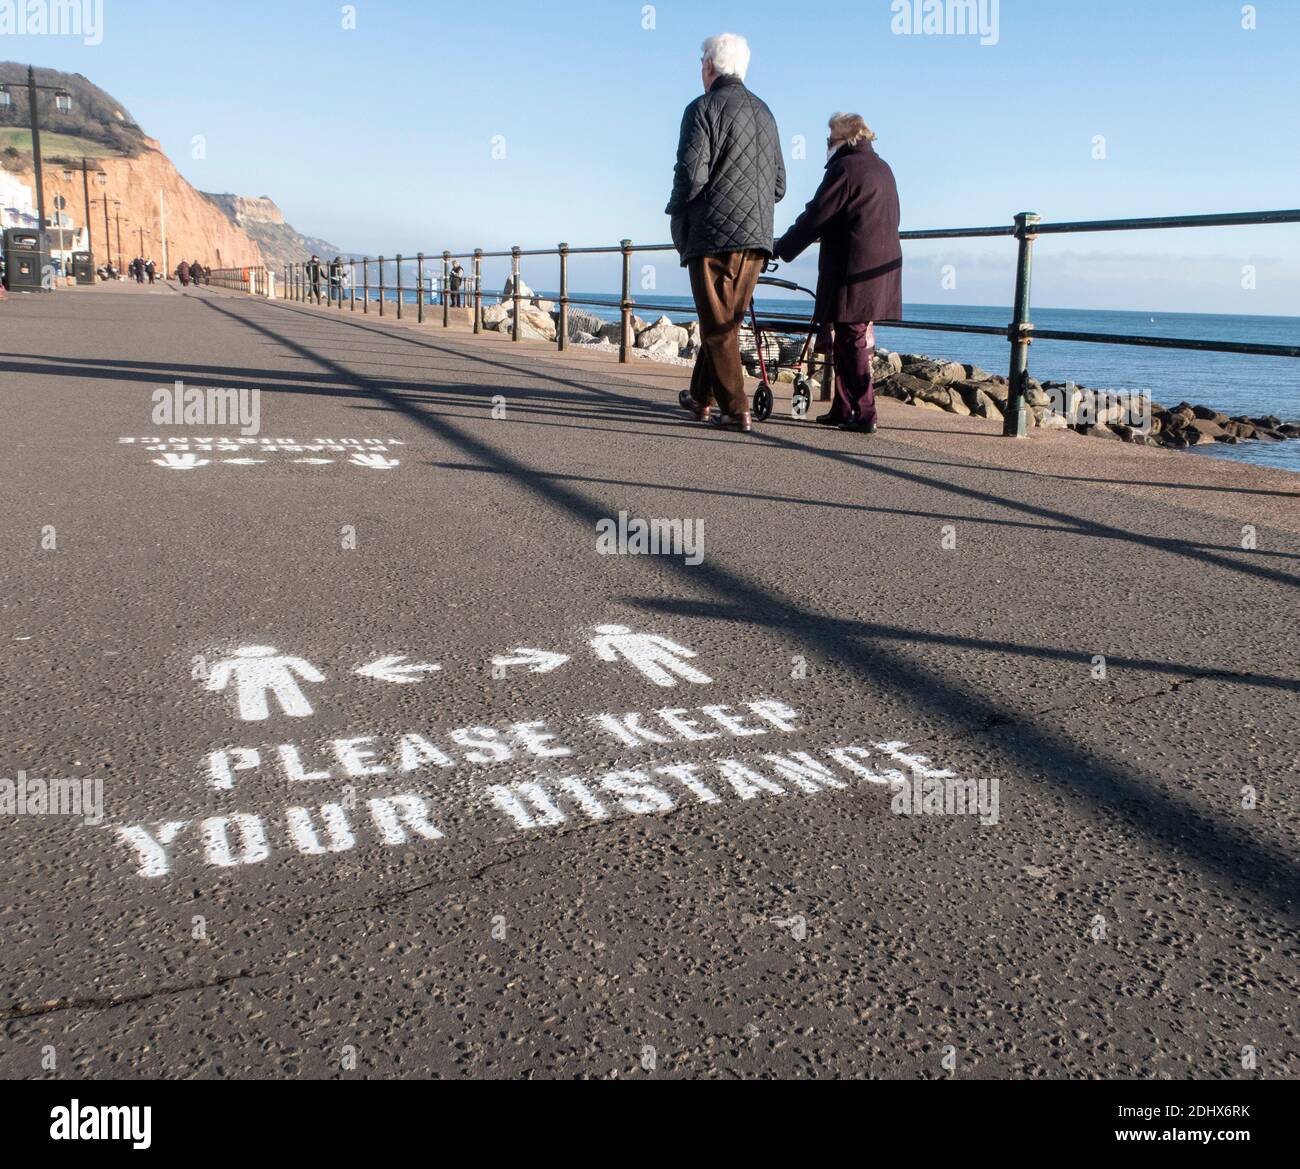 Keep your distance signs, social distancing, painted onto the Esplanade at Sidmouth, Devon, England, UK Stock Photo